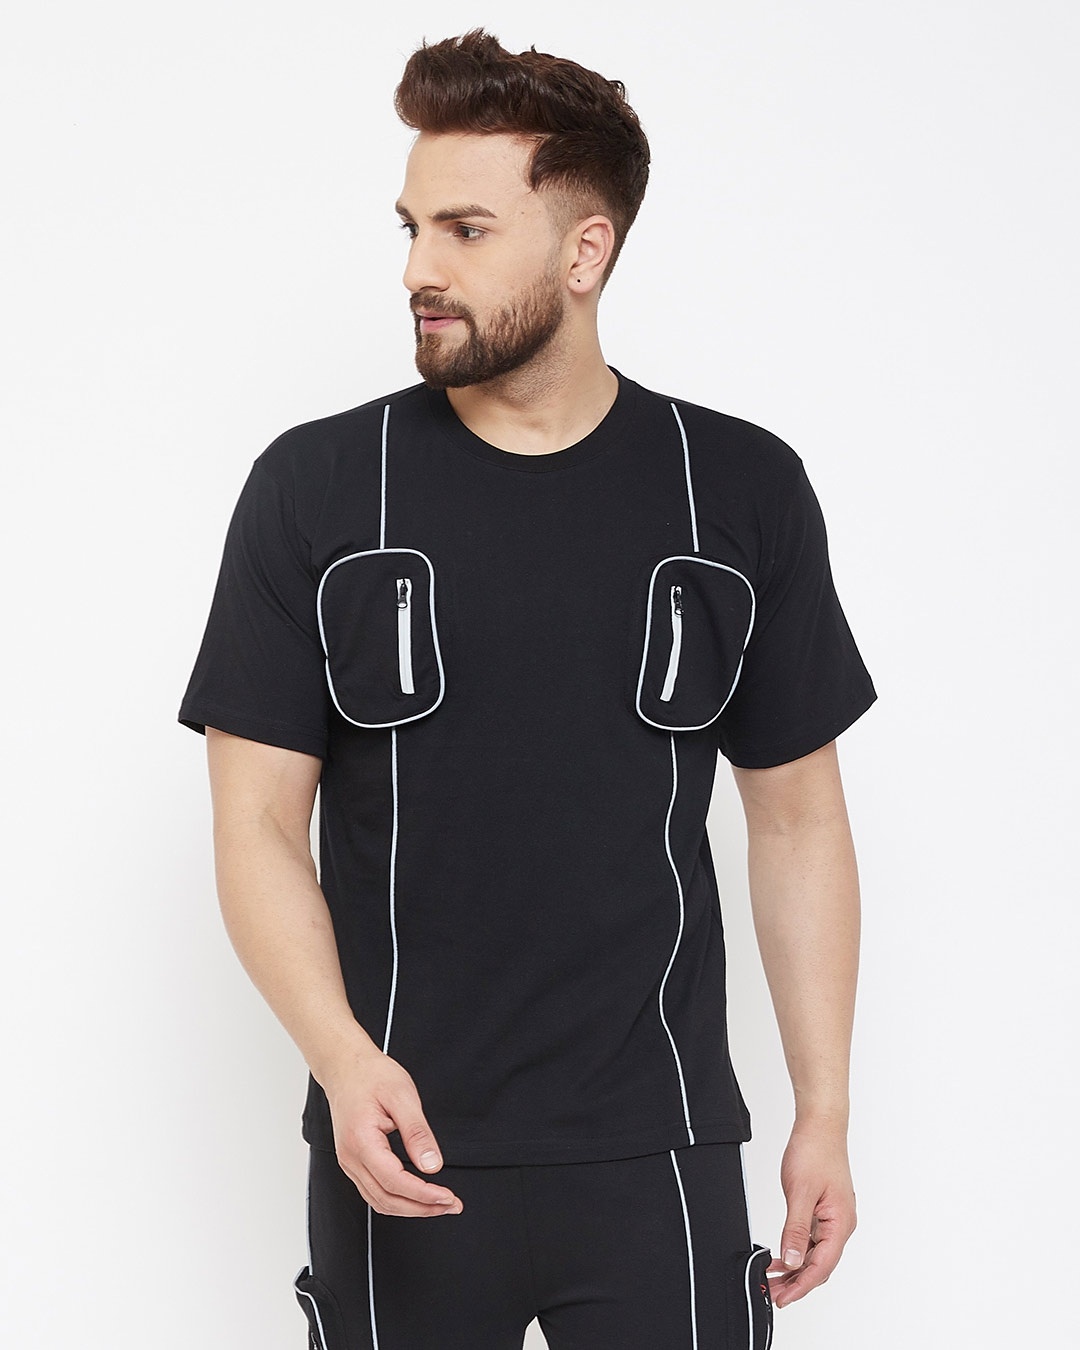 Shop Black Chest Pocket Reflective Piping T-Shirt-Front